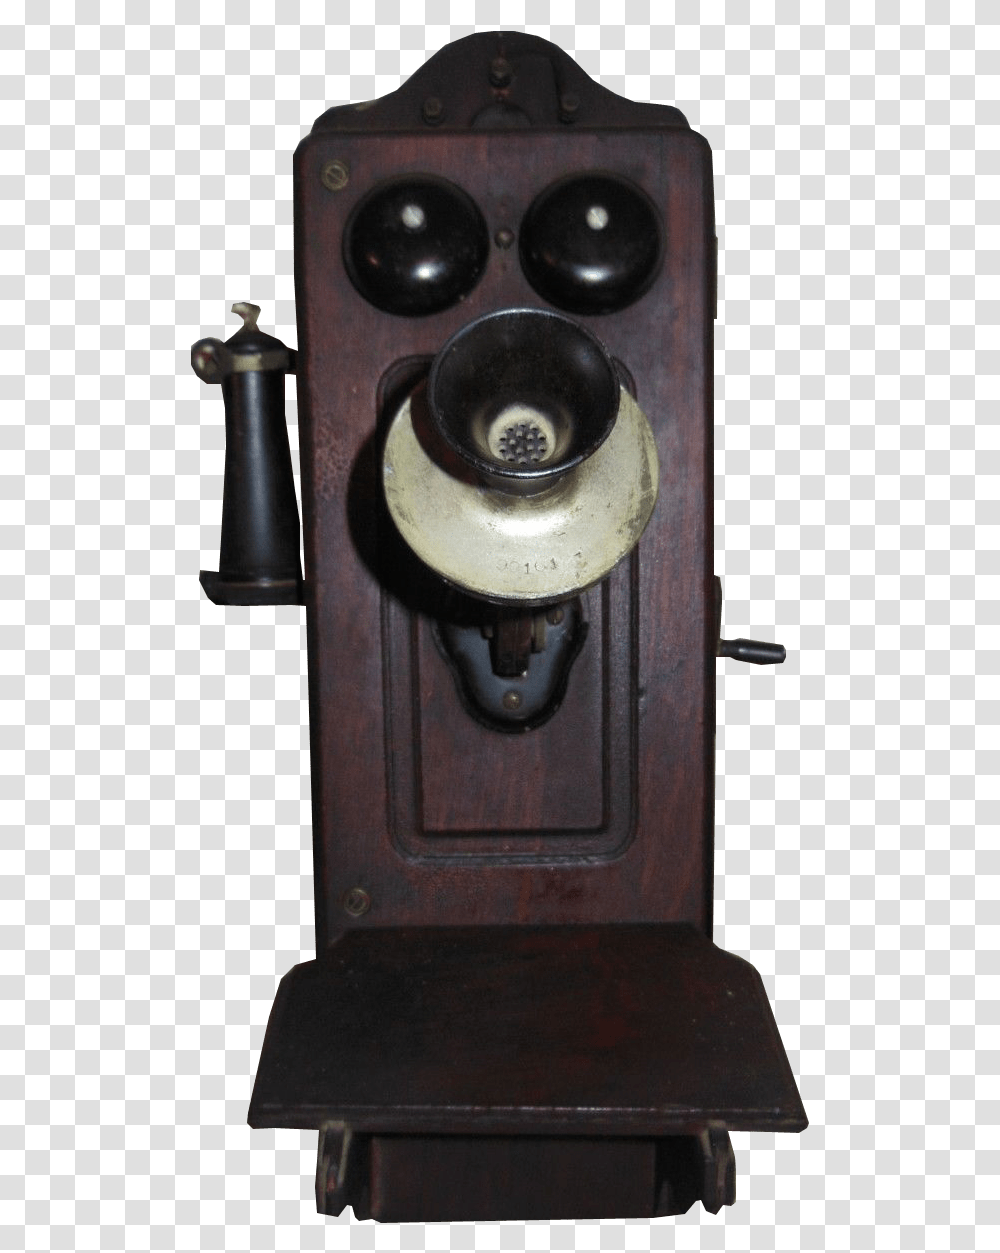 Vintage Wall Mount Telephone Image Free Images Vintage Wall Phone, Electronics, Dial Telephone Transparent Png